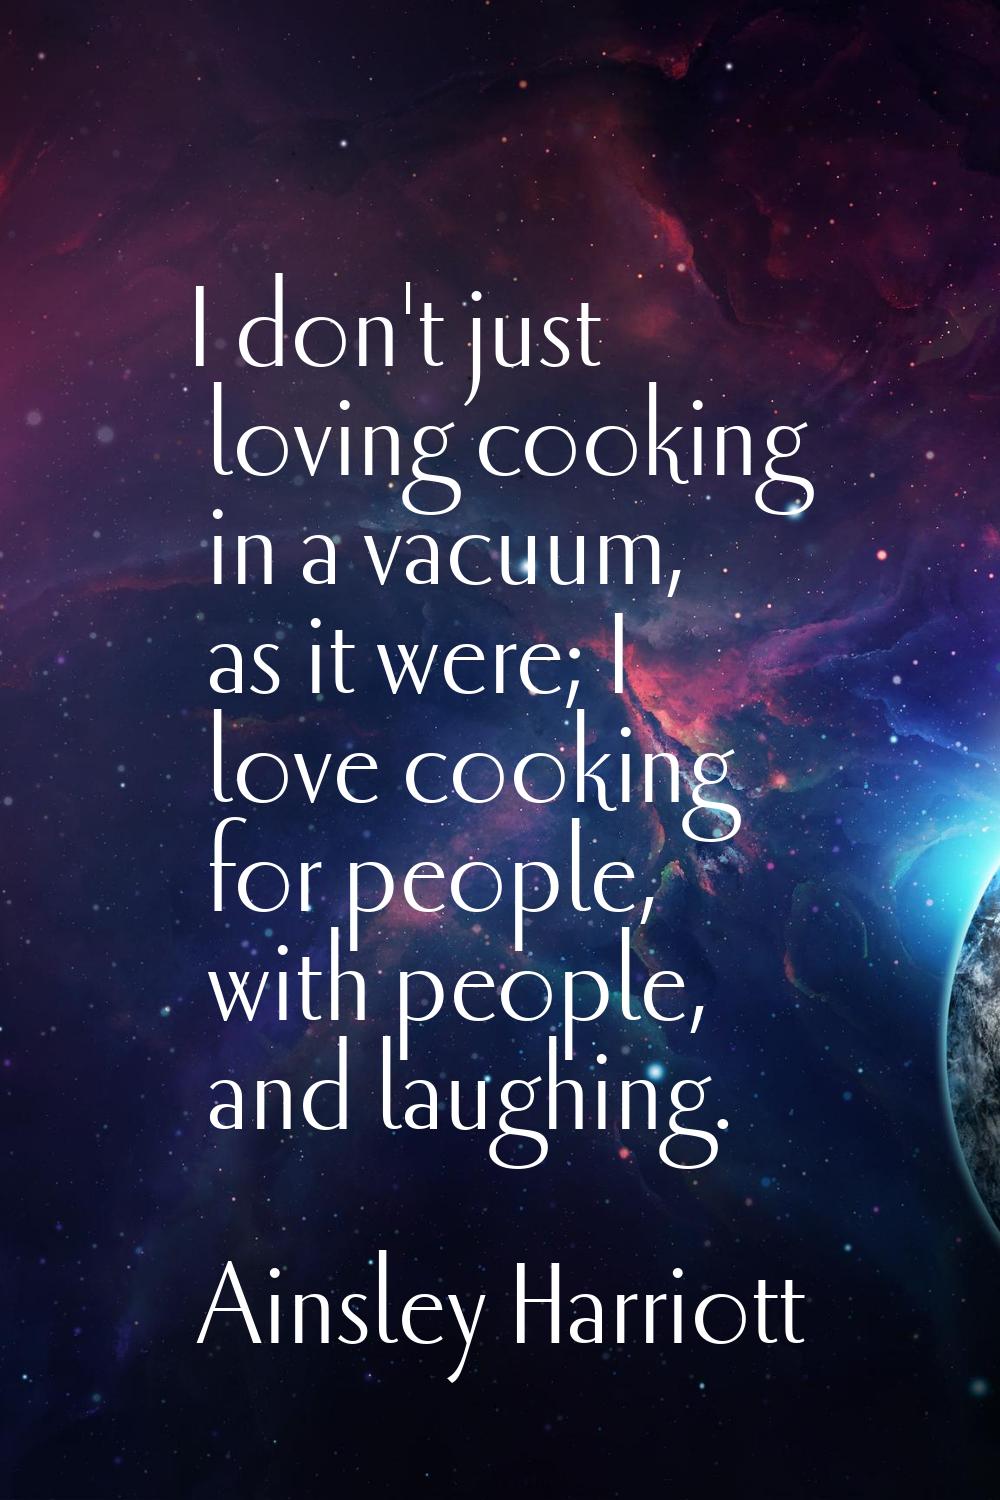 I don't just loving cooking in a vacuum, as it were; I love cooking for people, with people, and la